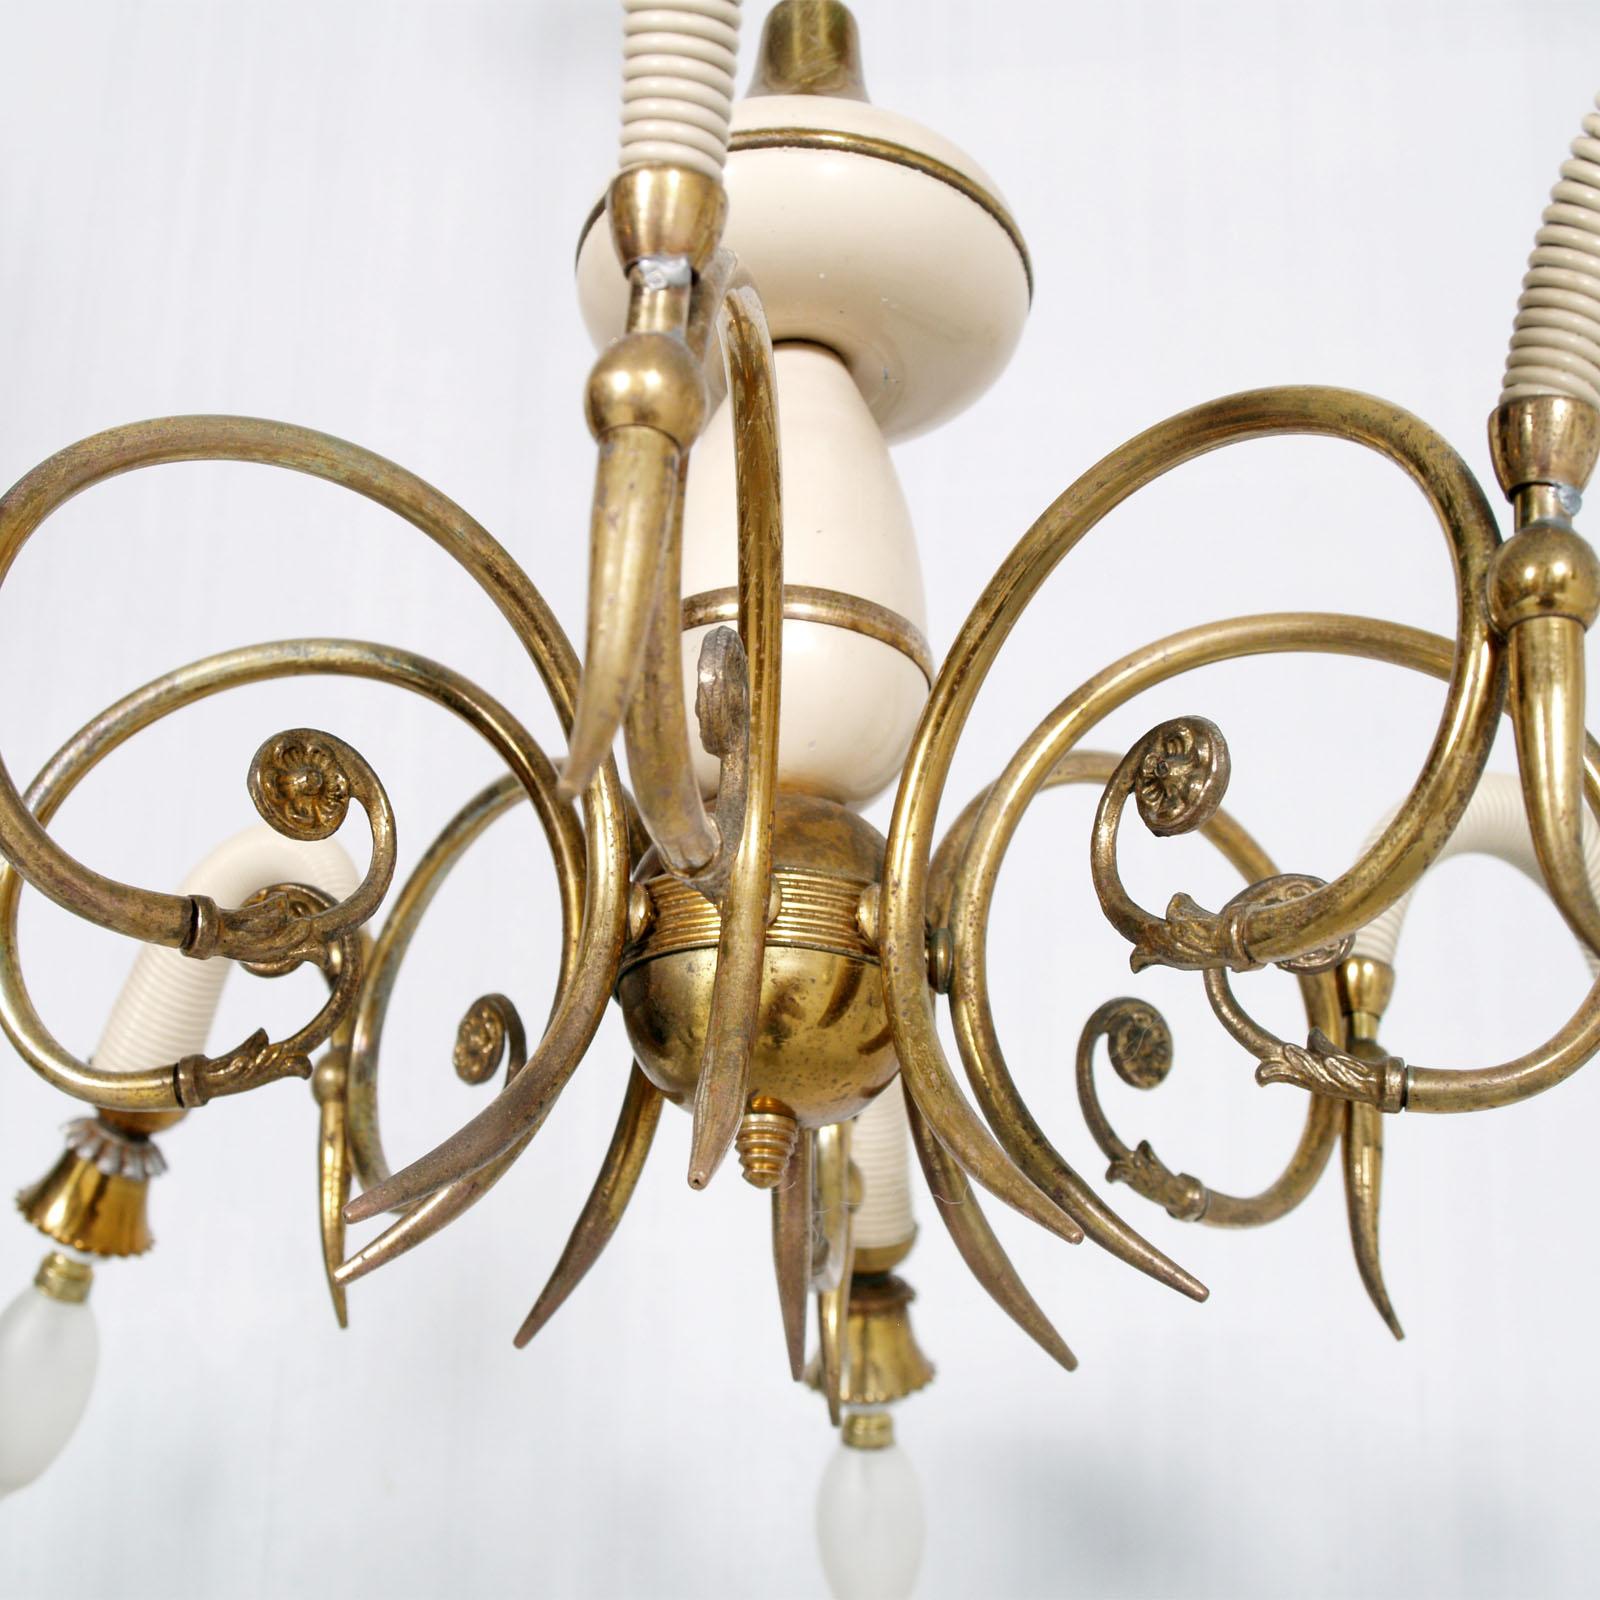 Italian Art Deco eight-arms chandelier from the 1930s. Curved brass arms are decorated in the final part with leafy and curly details. Each arm culminates in a spiral lacquered resin conical cover and eight original gold brass and ceramic